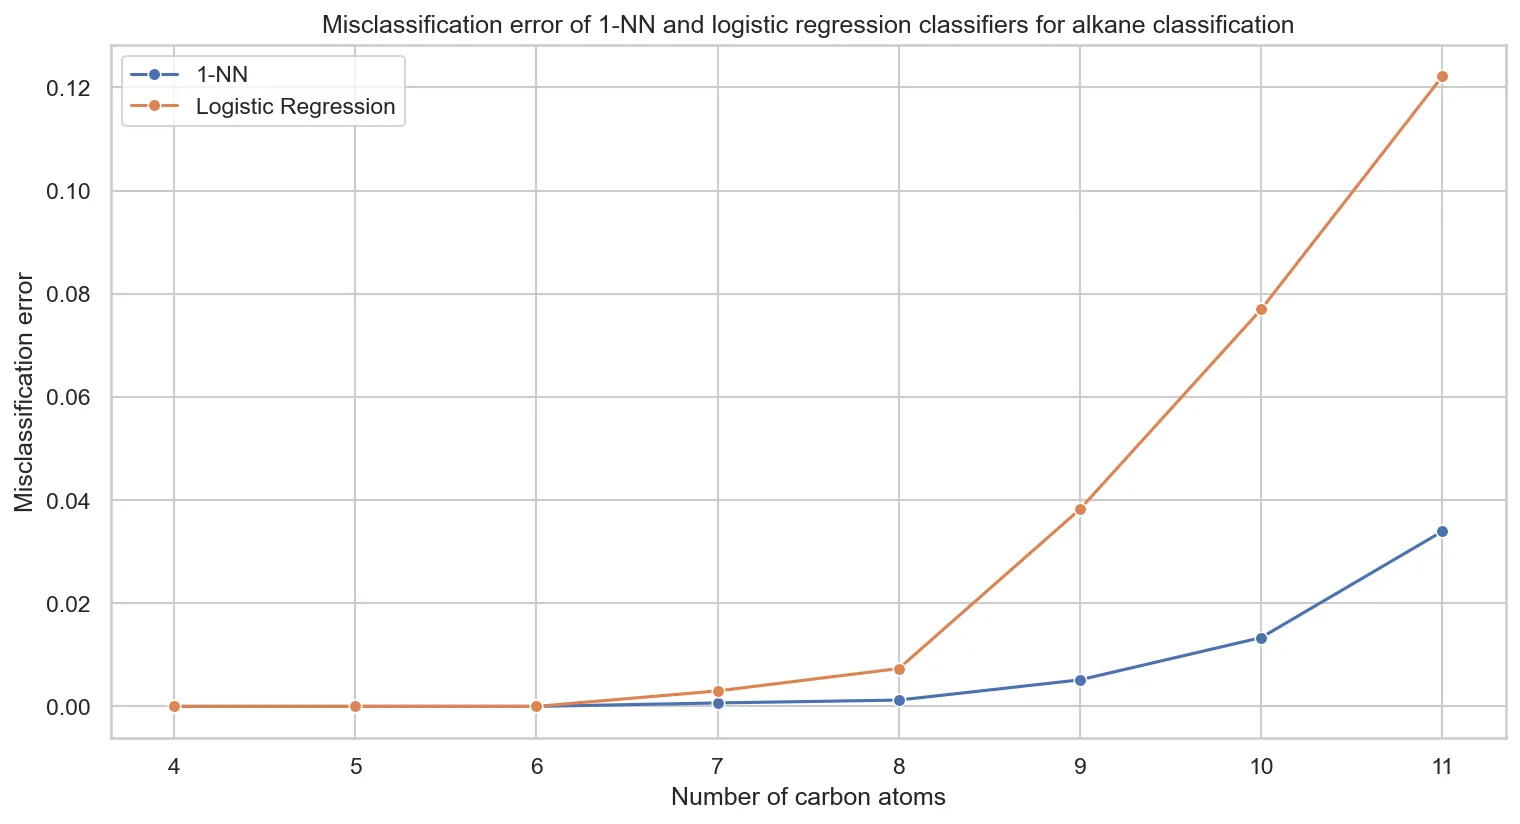 Misclassification error of 1-NN and Logistic Regression classifiers for alkane classification